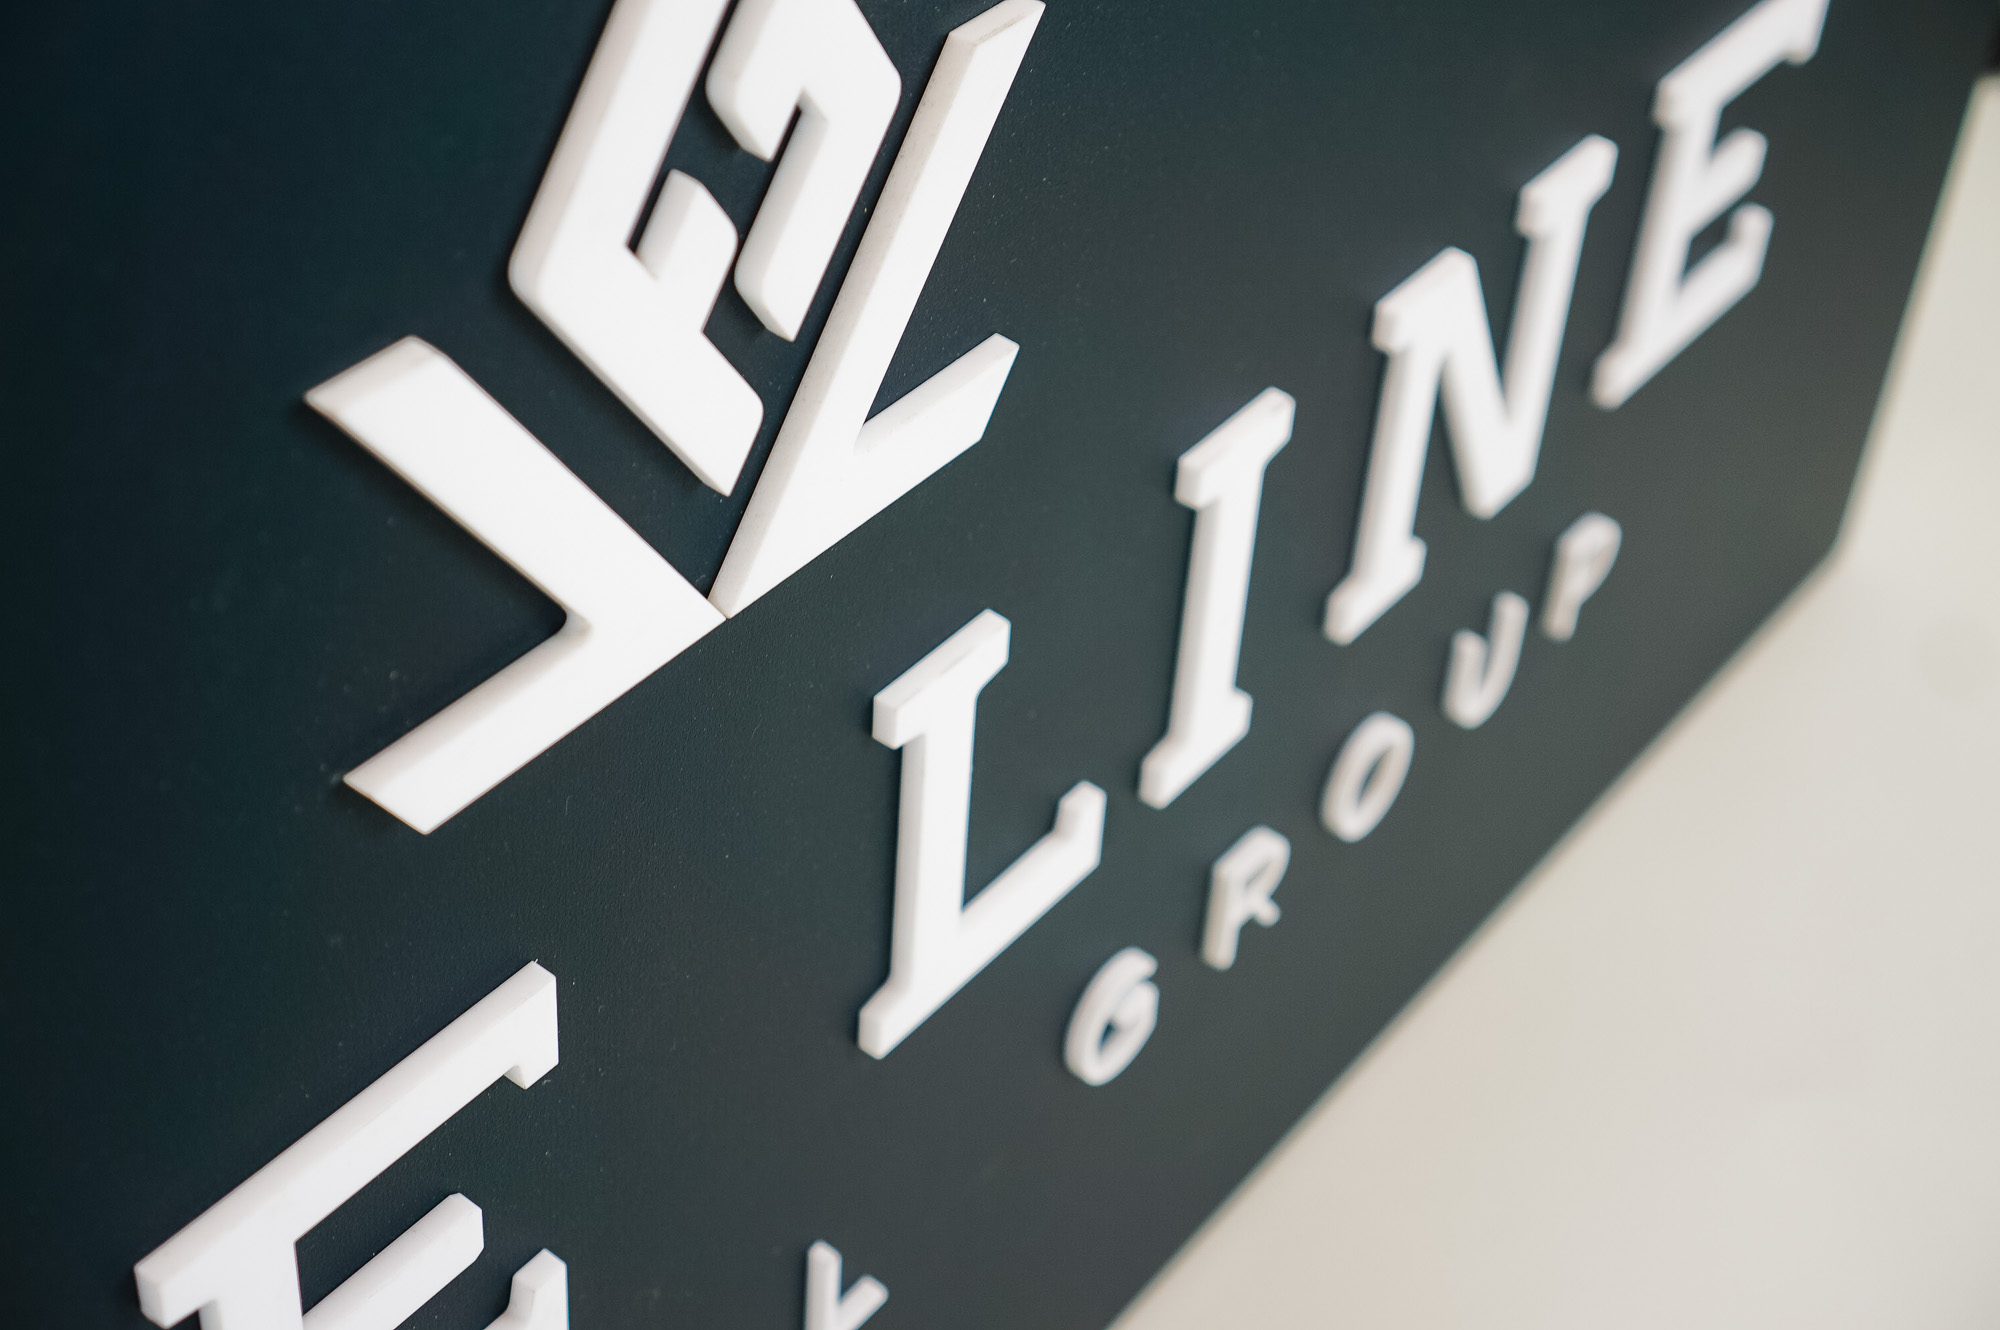 Raised dark navy blue raised sign with white lettering for Life Line Financial Group, a multi-family office with a dedicated team of Certified Financial Planners